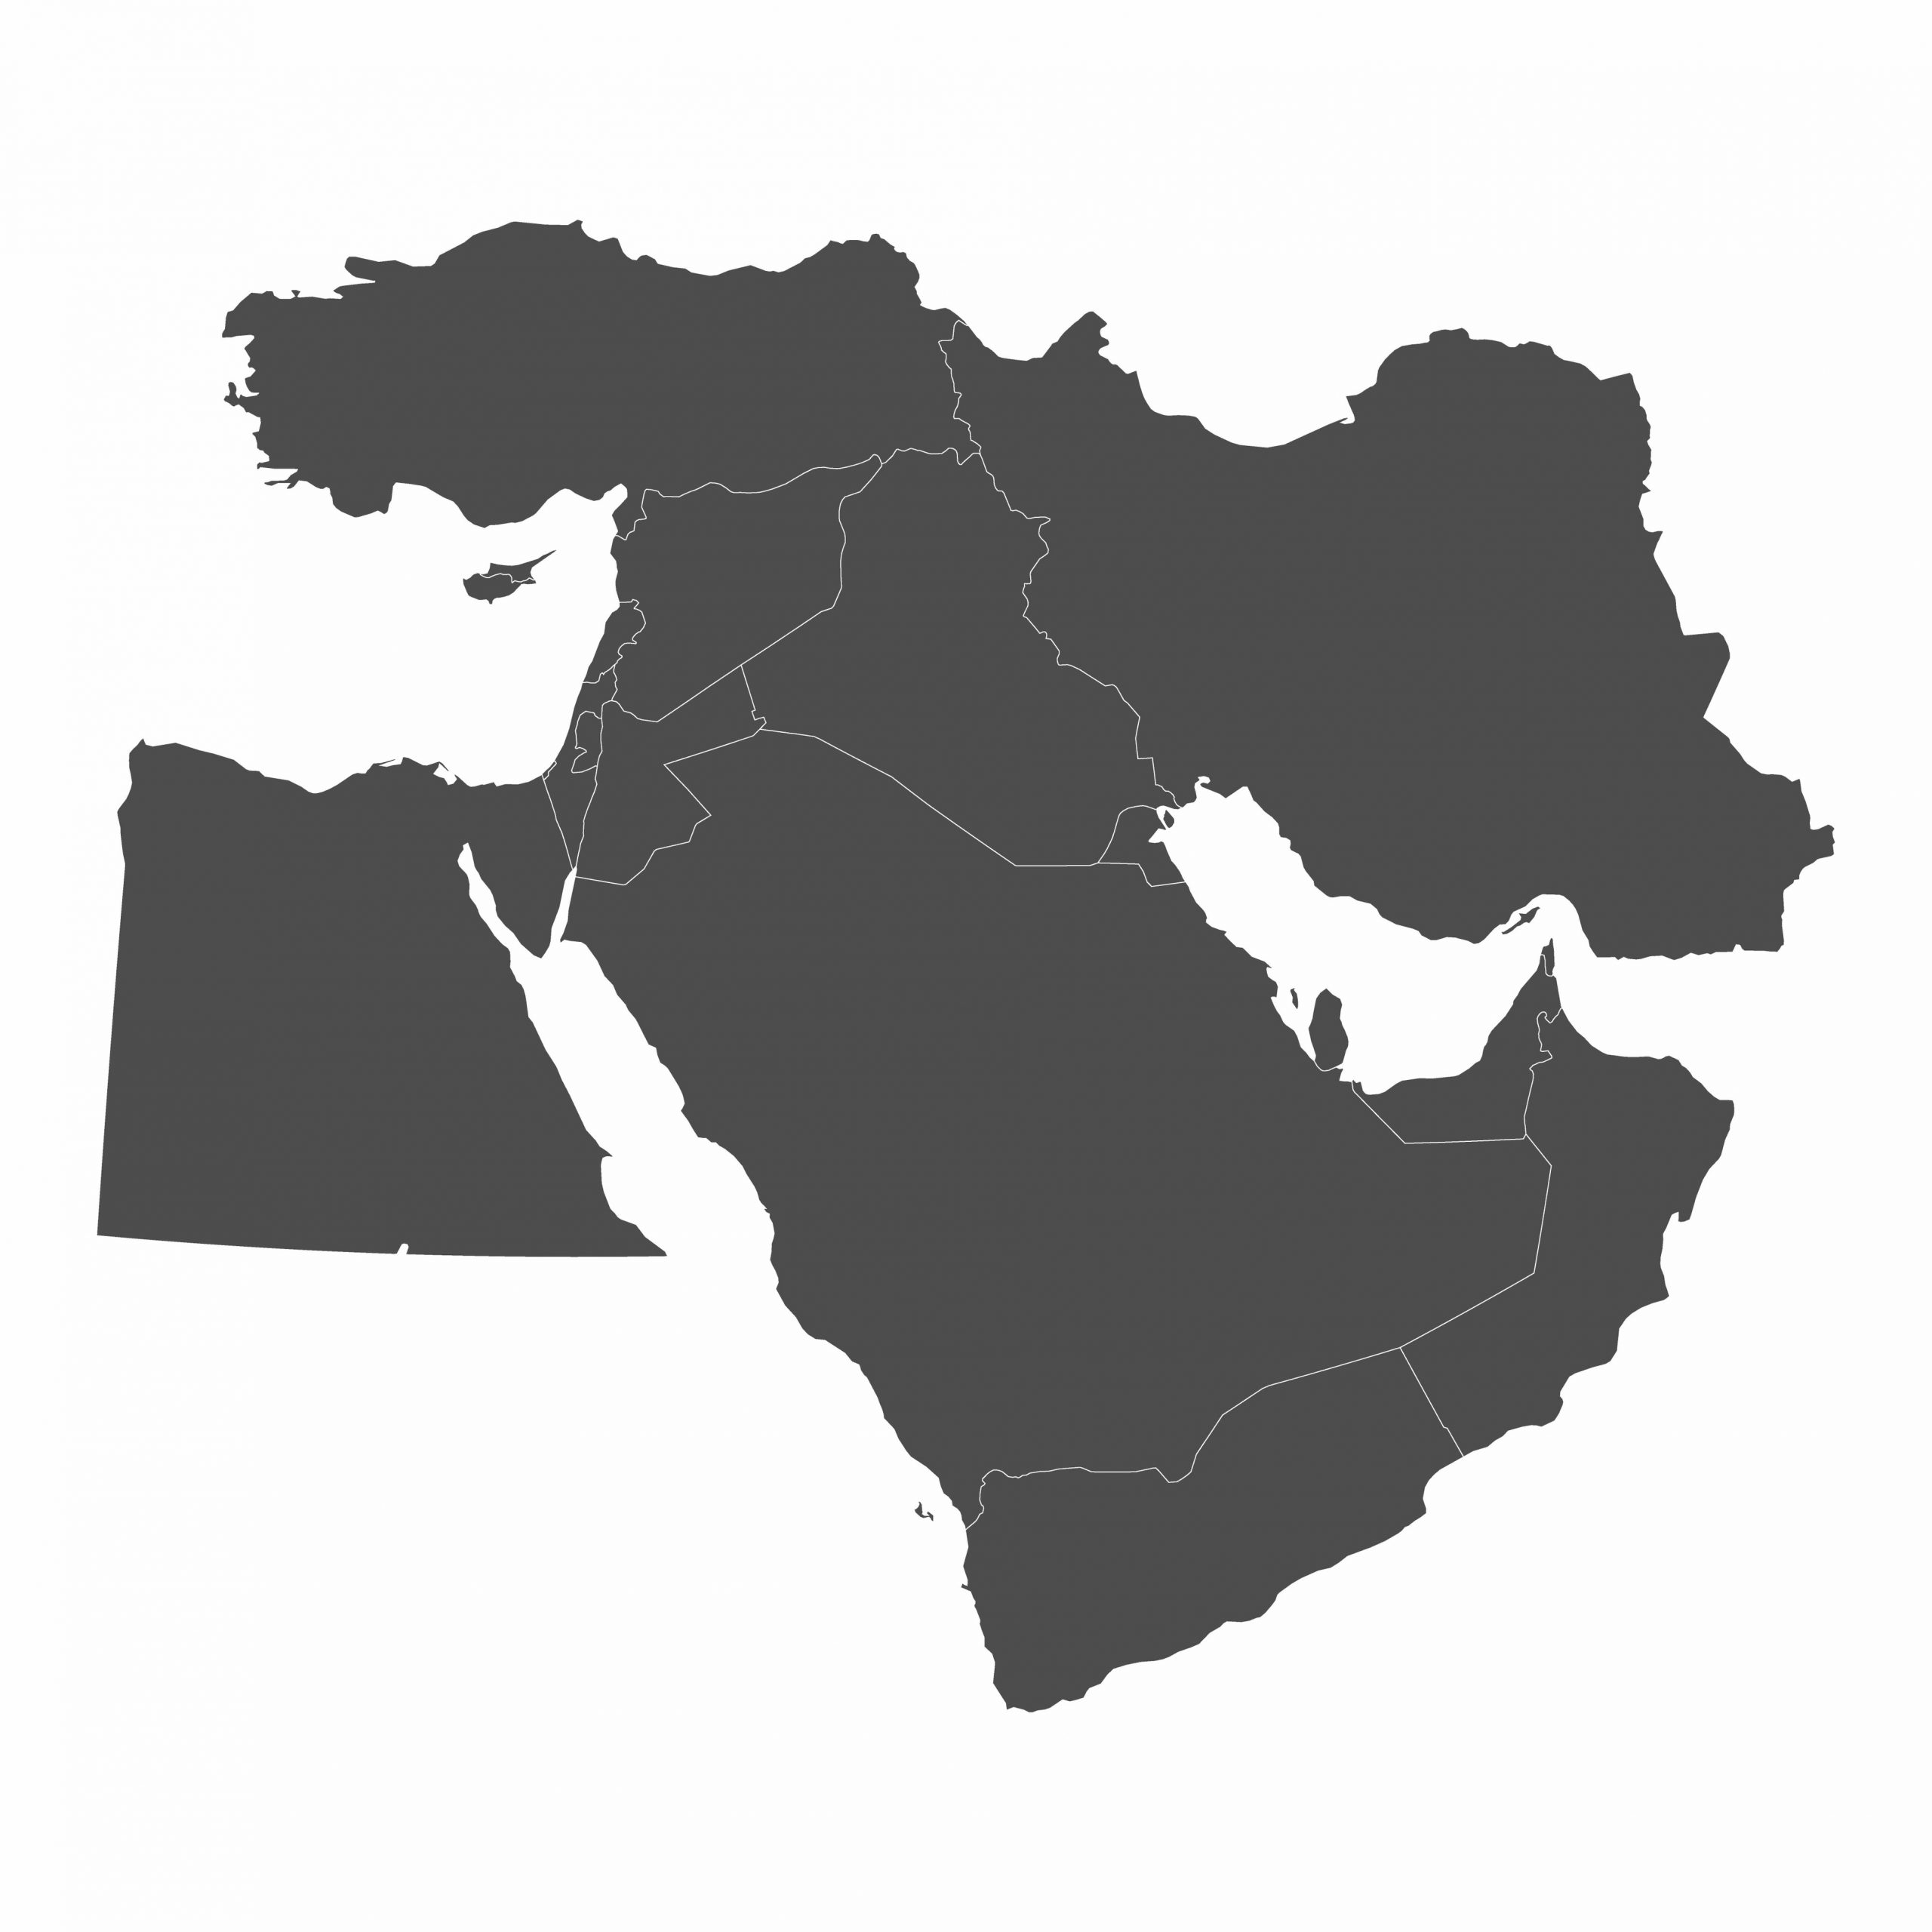 Map of Middle East with borders of countries